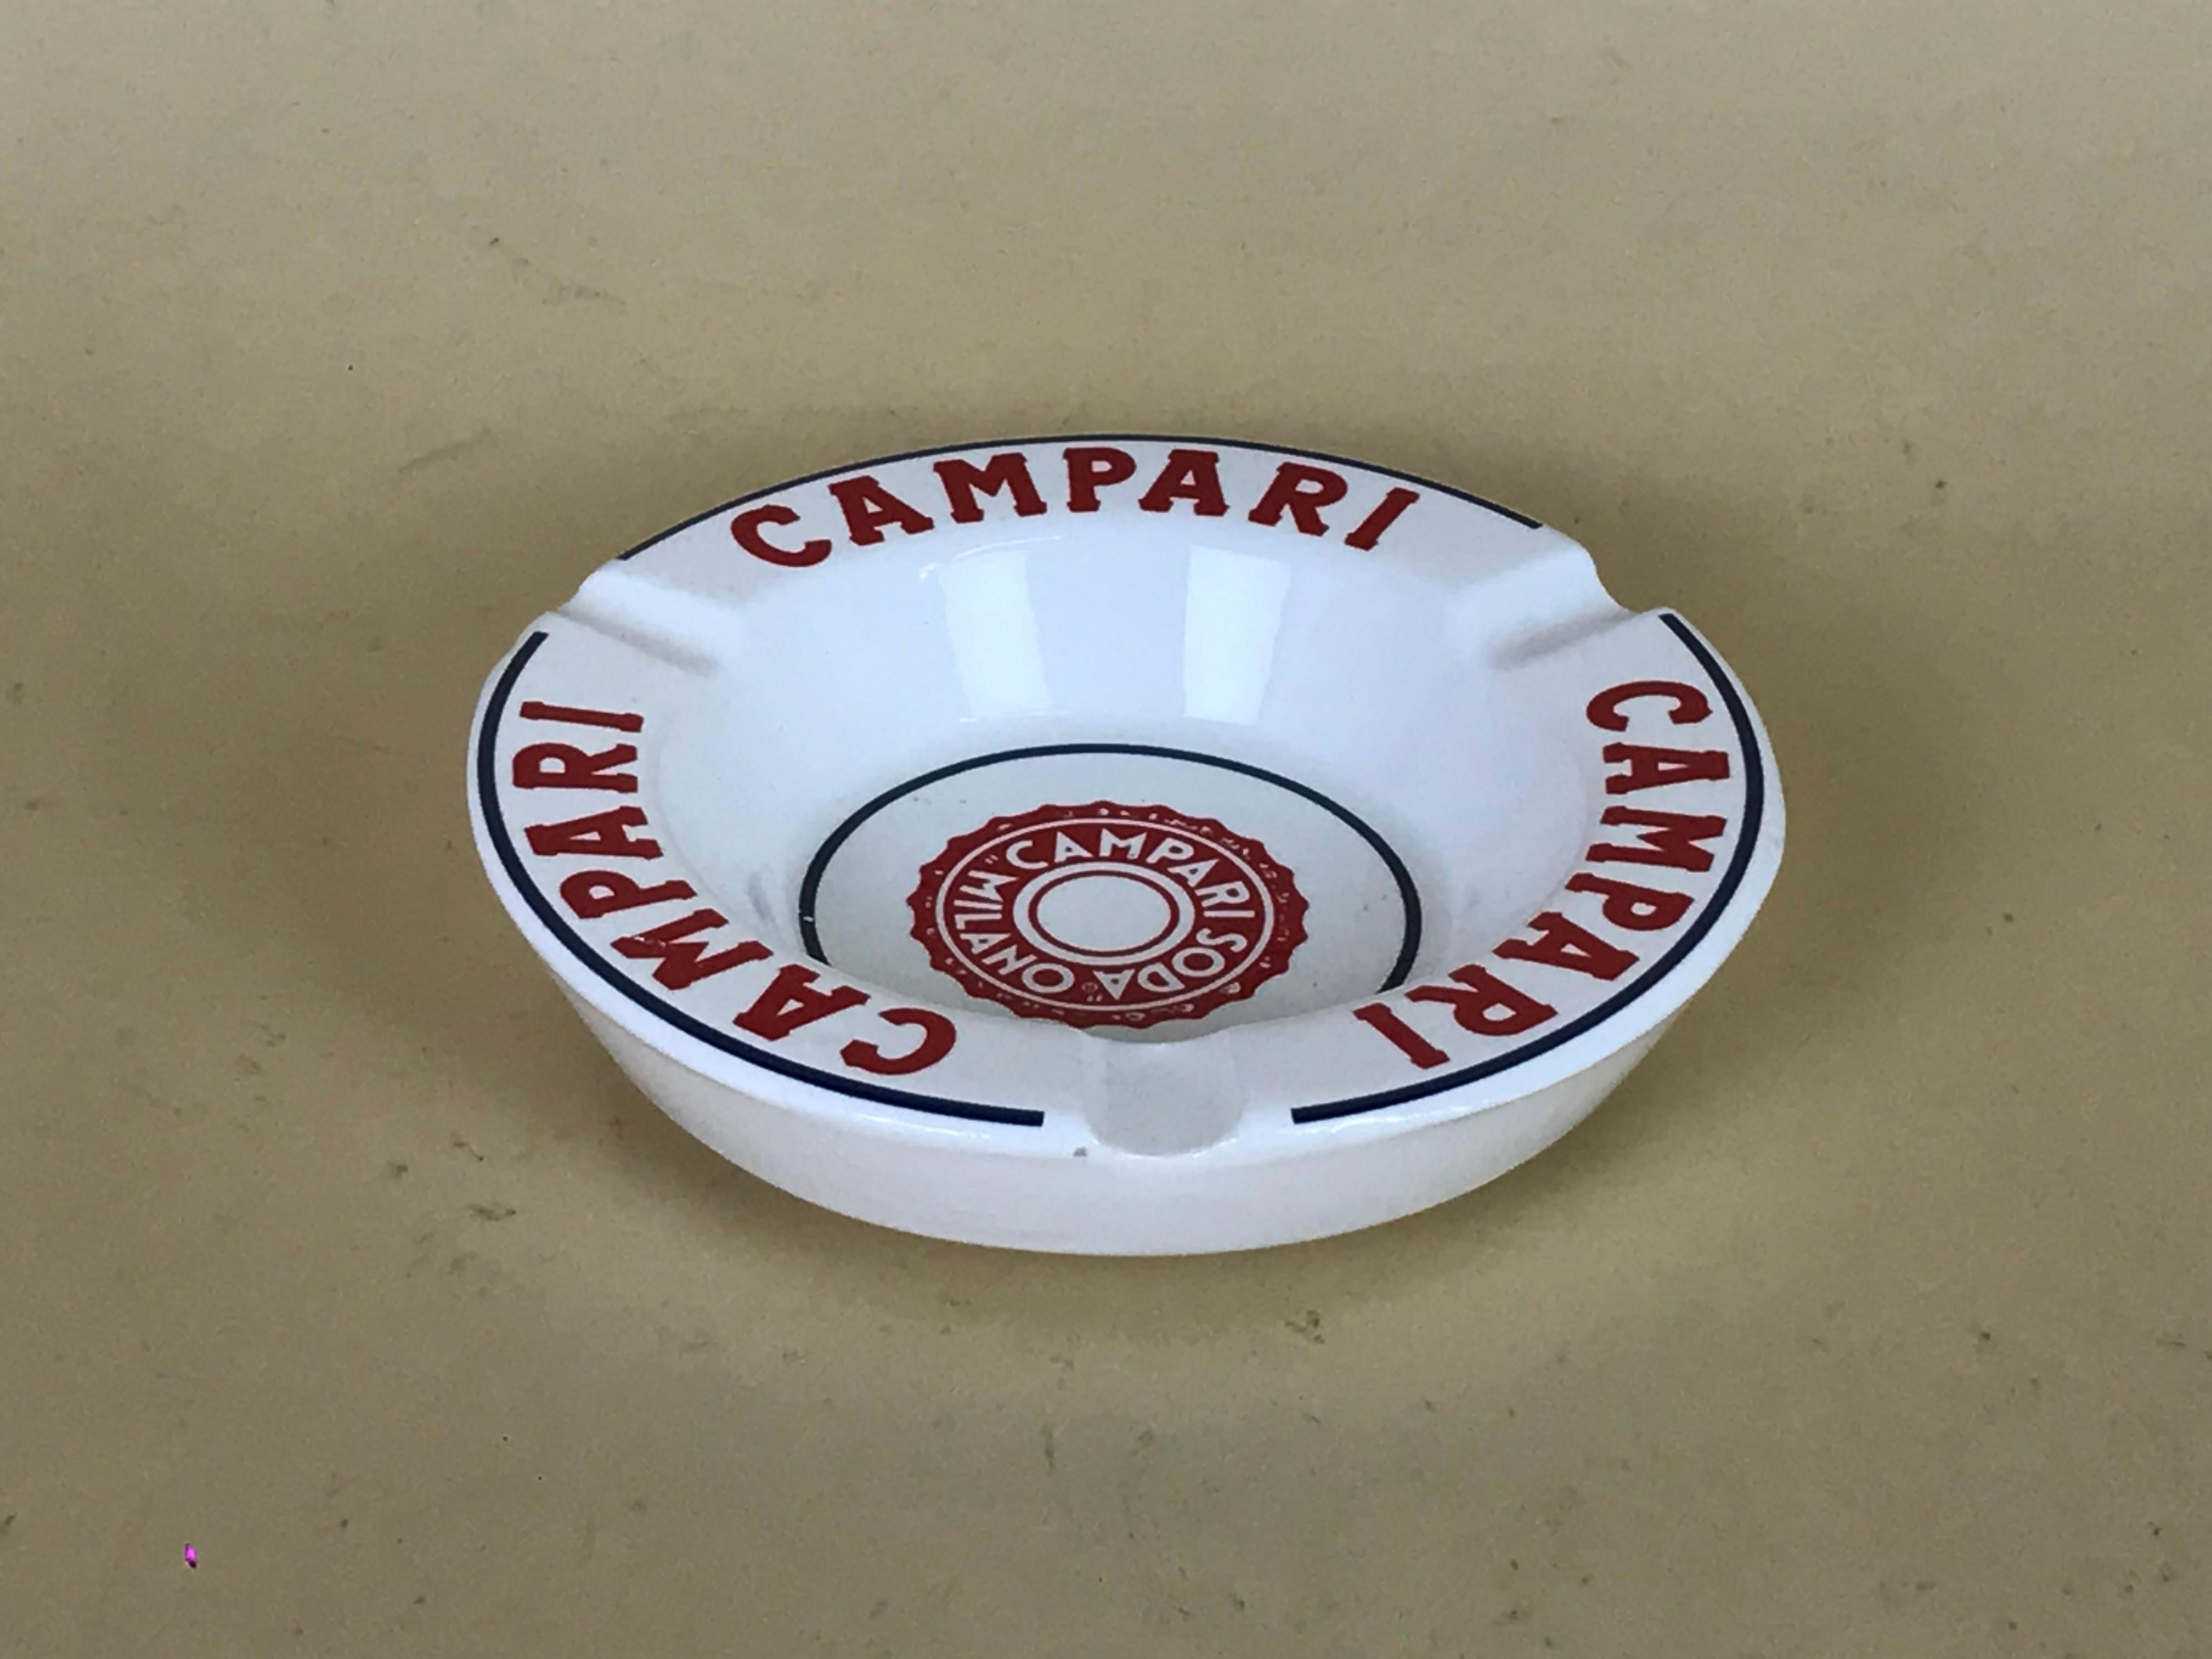 Mid-Century Modern 1970s Vintage Advertising Campari Soda Milano Ashtray in White and Red Ceramic For Sale